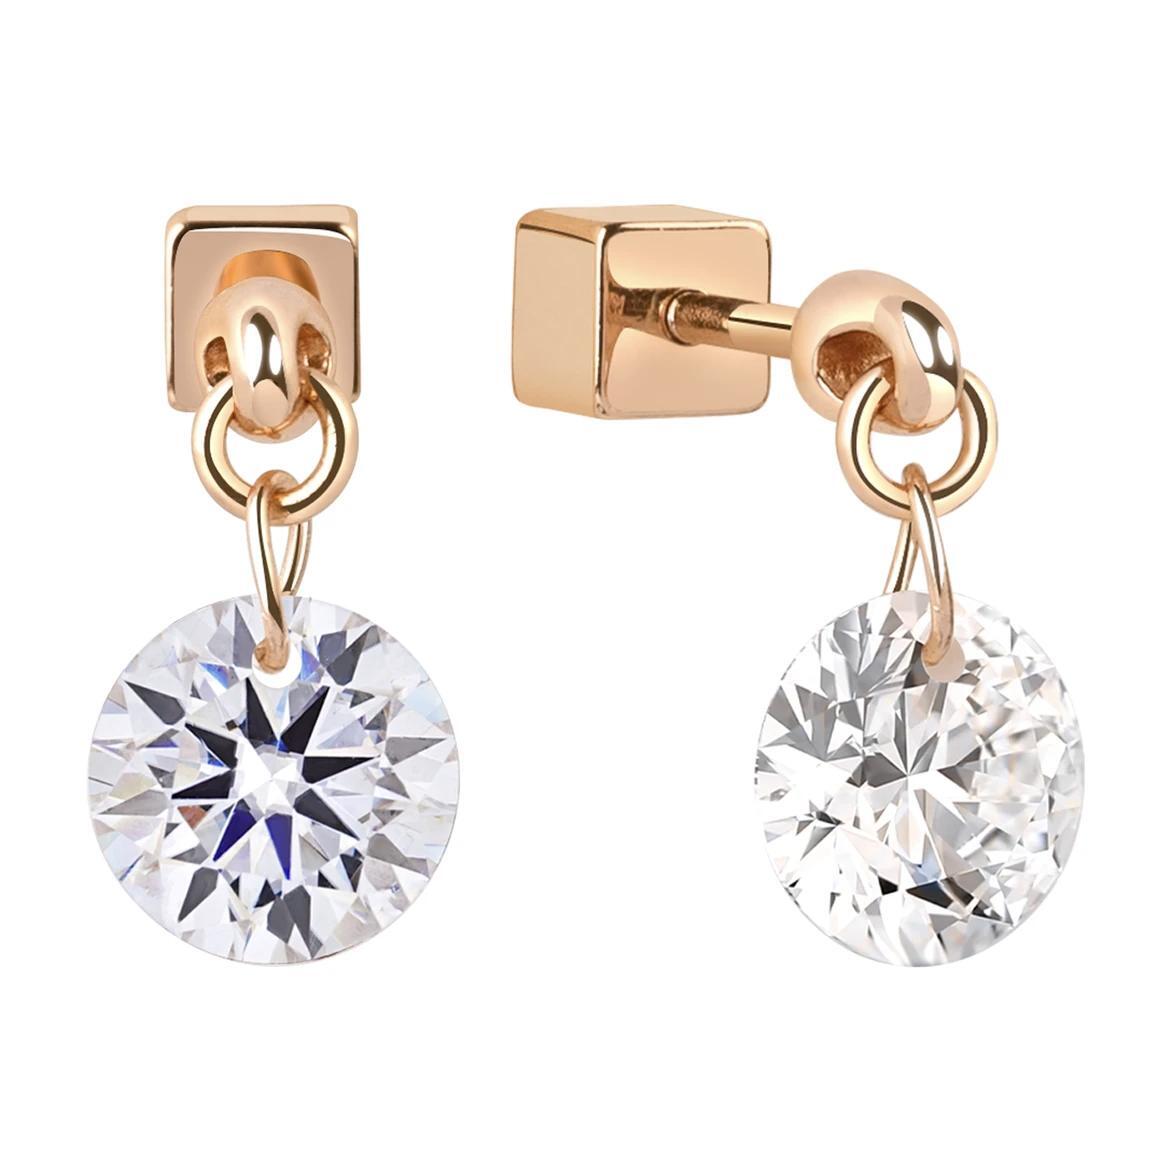 0.5ct/ 1ct Moissanite Earrings With Square Screw Backs